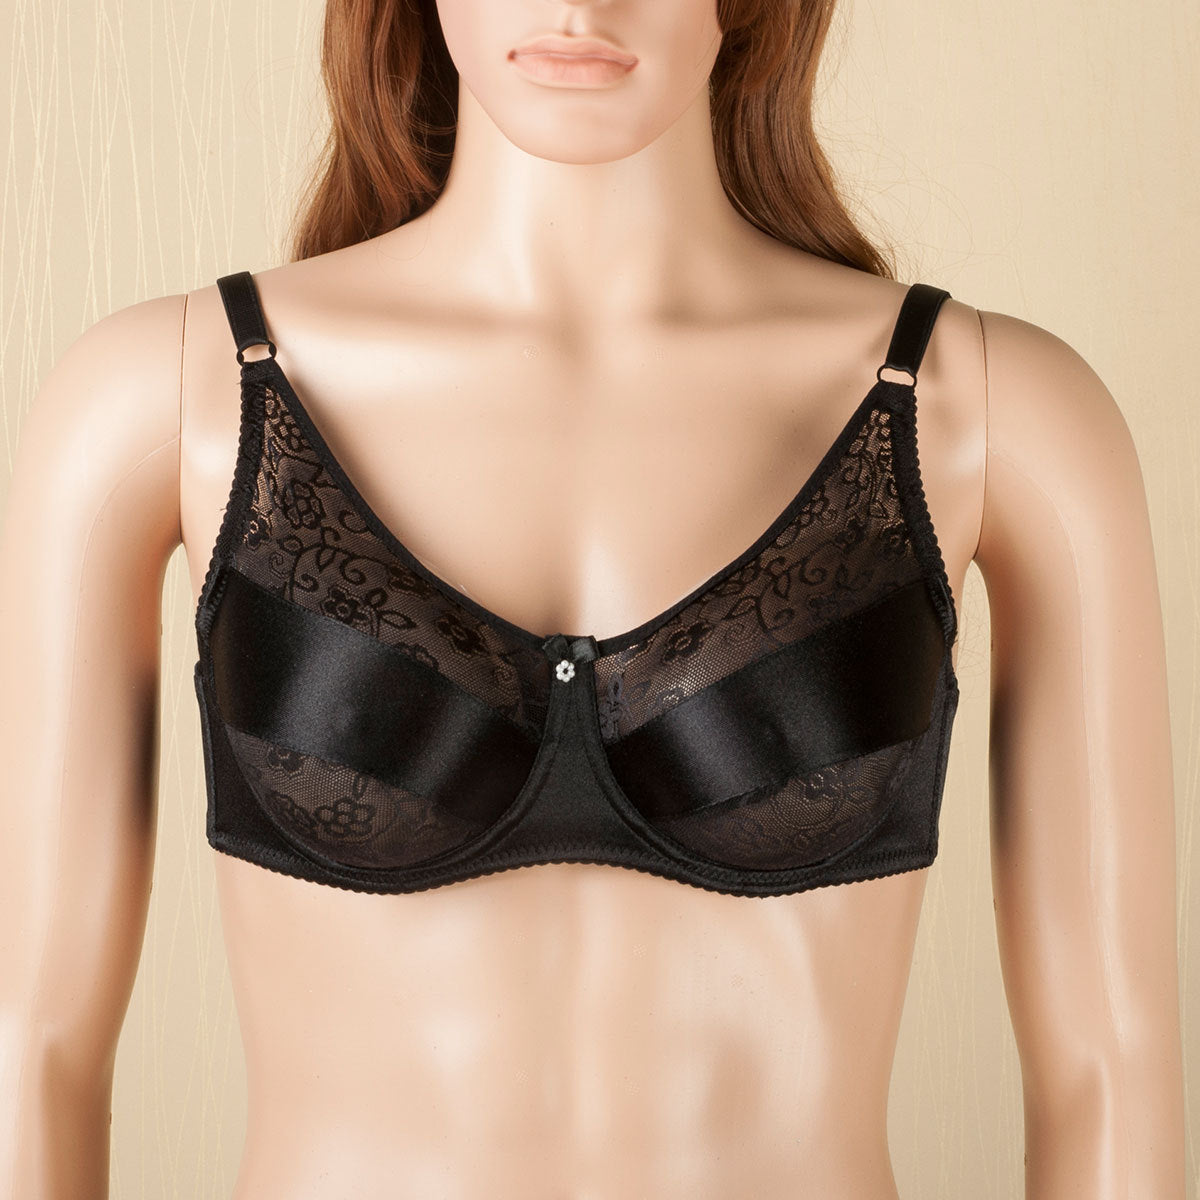 Teardrop Shaped Silicone Breast Forms with Black Pocket Bra